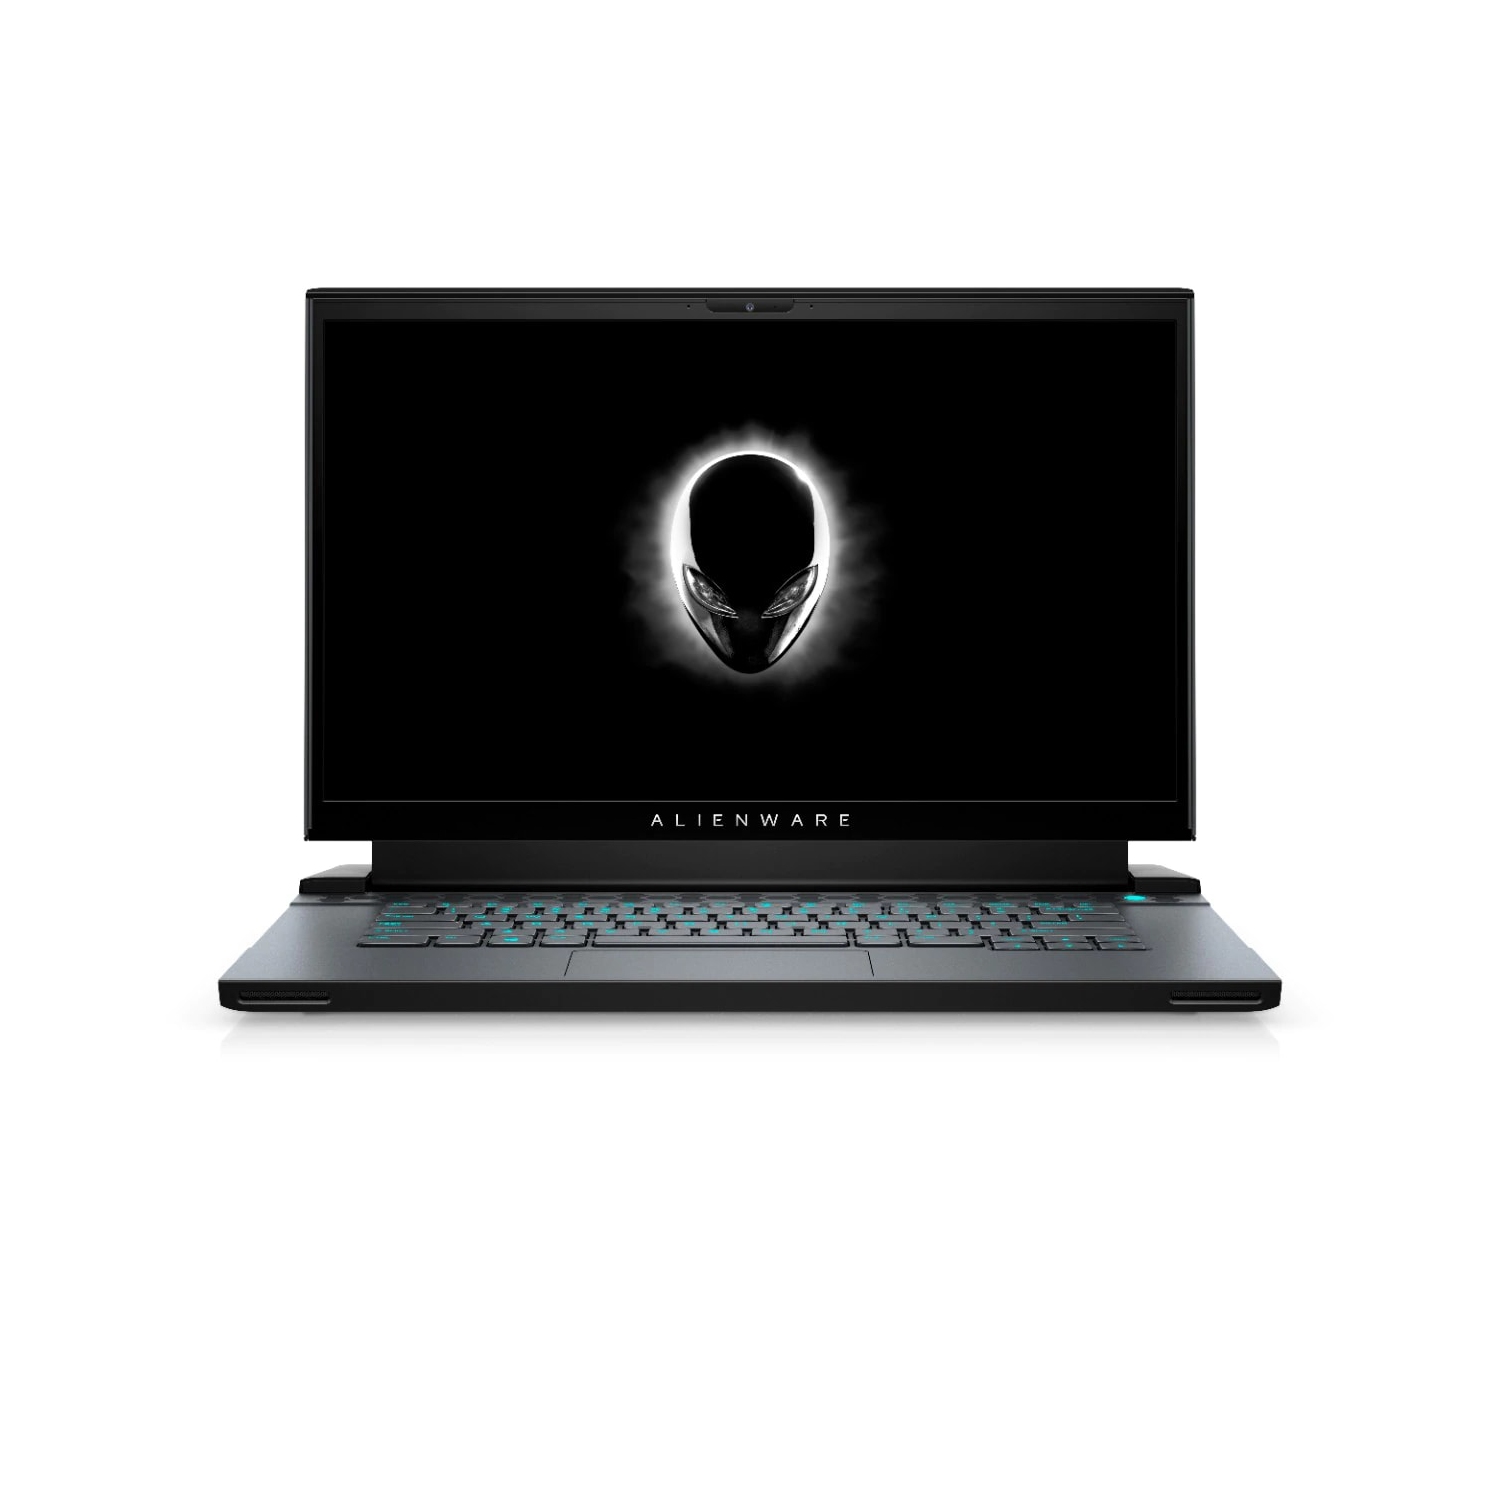 Refurbished (Excellent) - Dell Alienware m15 R4 Gaming Laptop (2021), 15.6" FHD, Core i7, 512GB SSD, 32GB RAM, RTX 3080, 8 Cores @ 5 GHz, 10th Gen CPU Certified